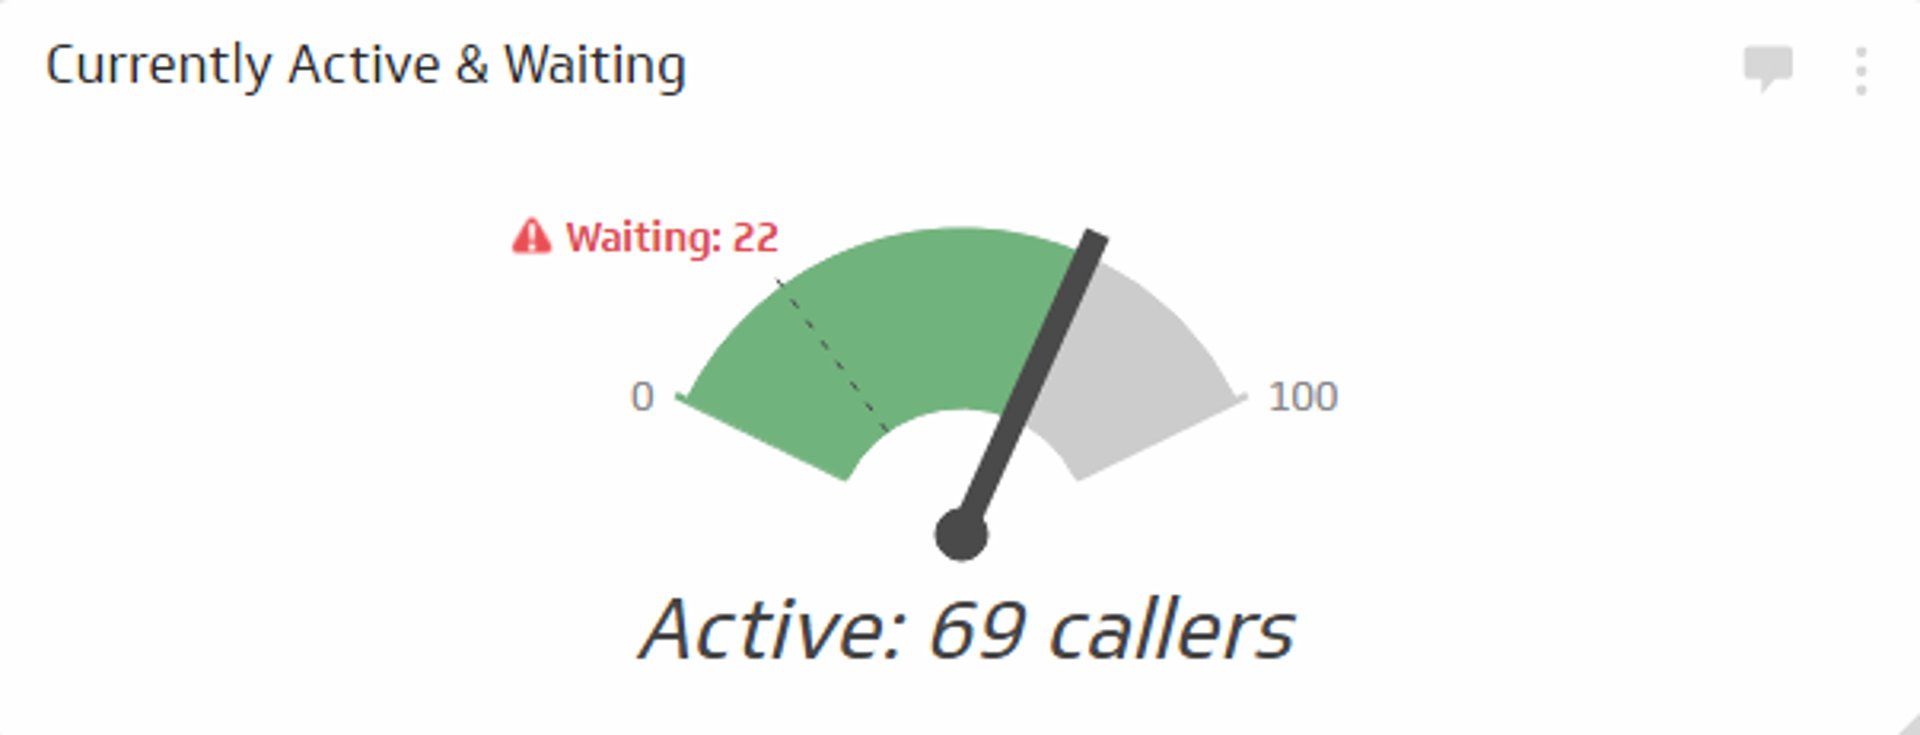 Call Center KPI Example - Active and Waiting Calls Metric